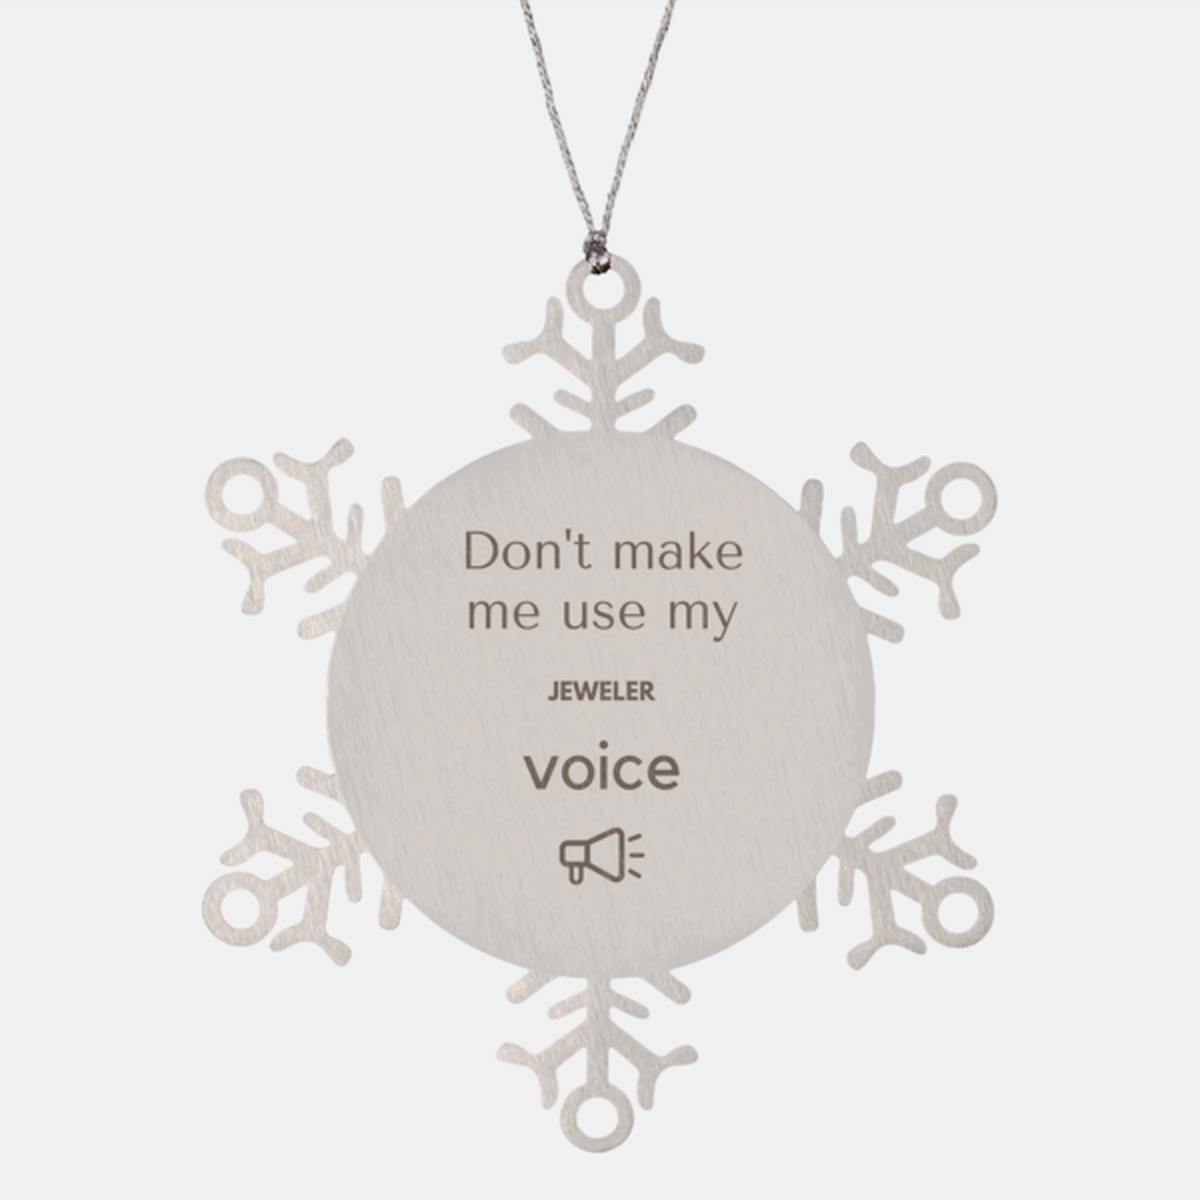 Don't make me use my Jeweler voice, Sarcasm Jeweler Ornament Gifts, Christmas Jeweler Snowflake Ornament Unique Gifts For Jeweler Coworkers, Men, Women, Colleague, Friends